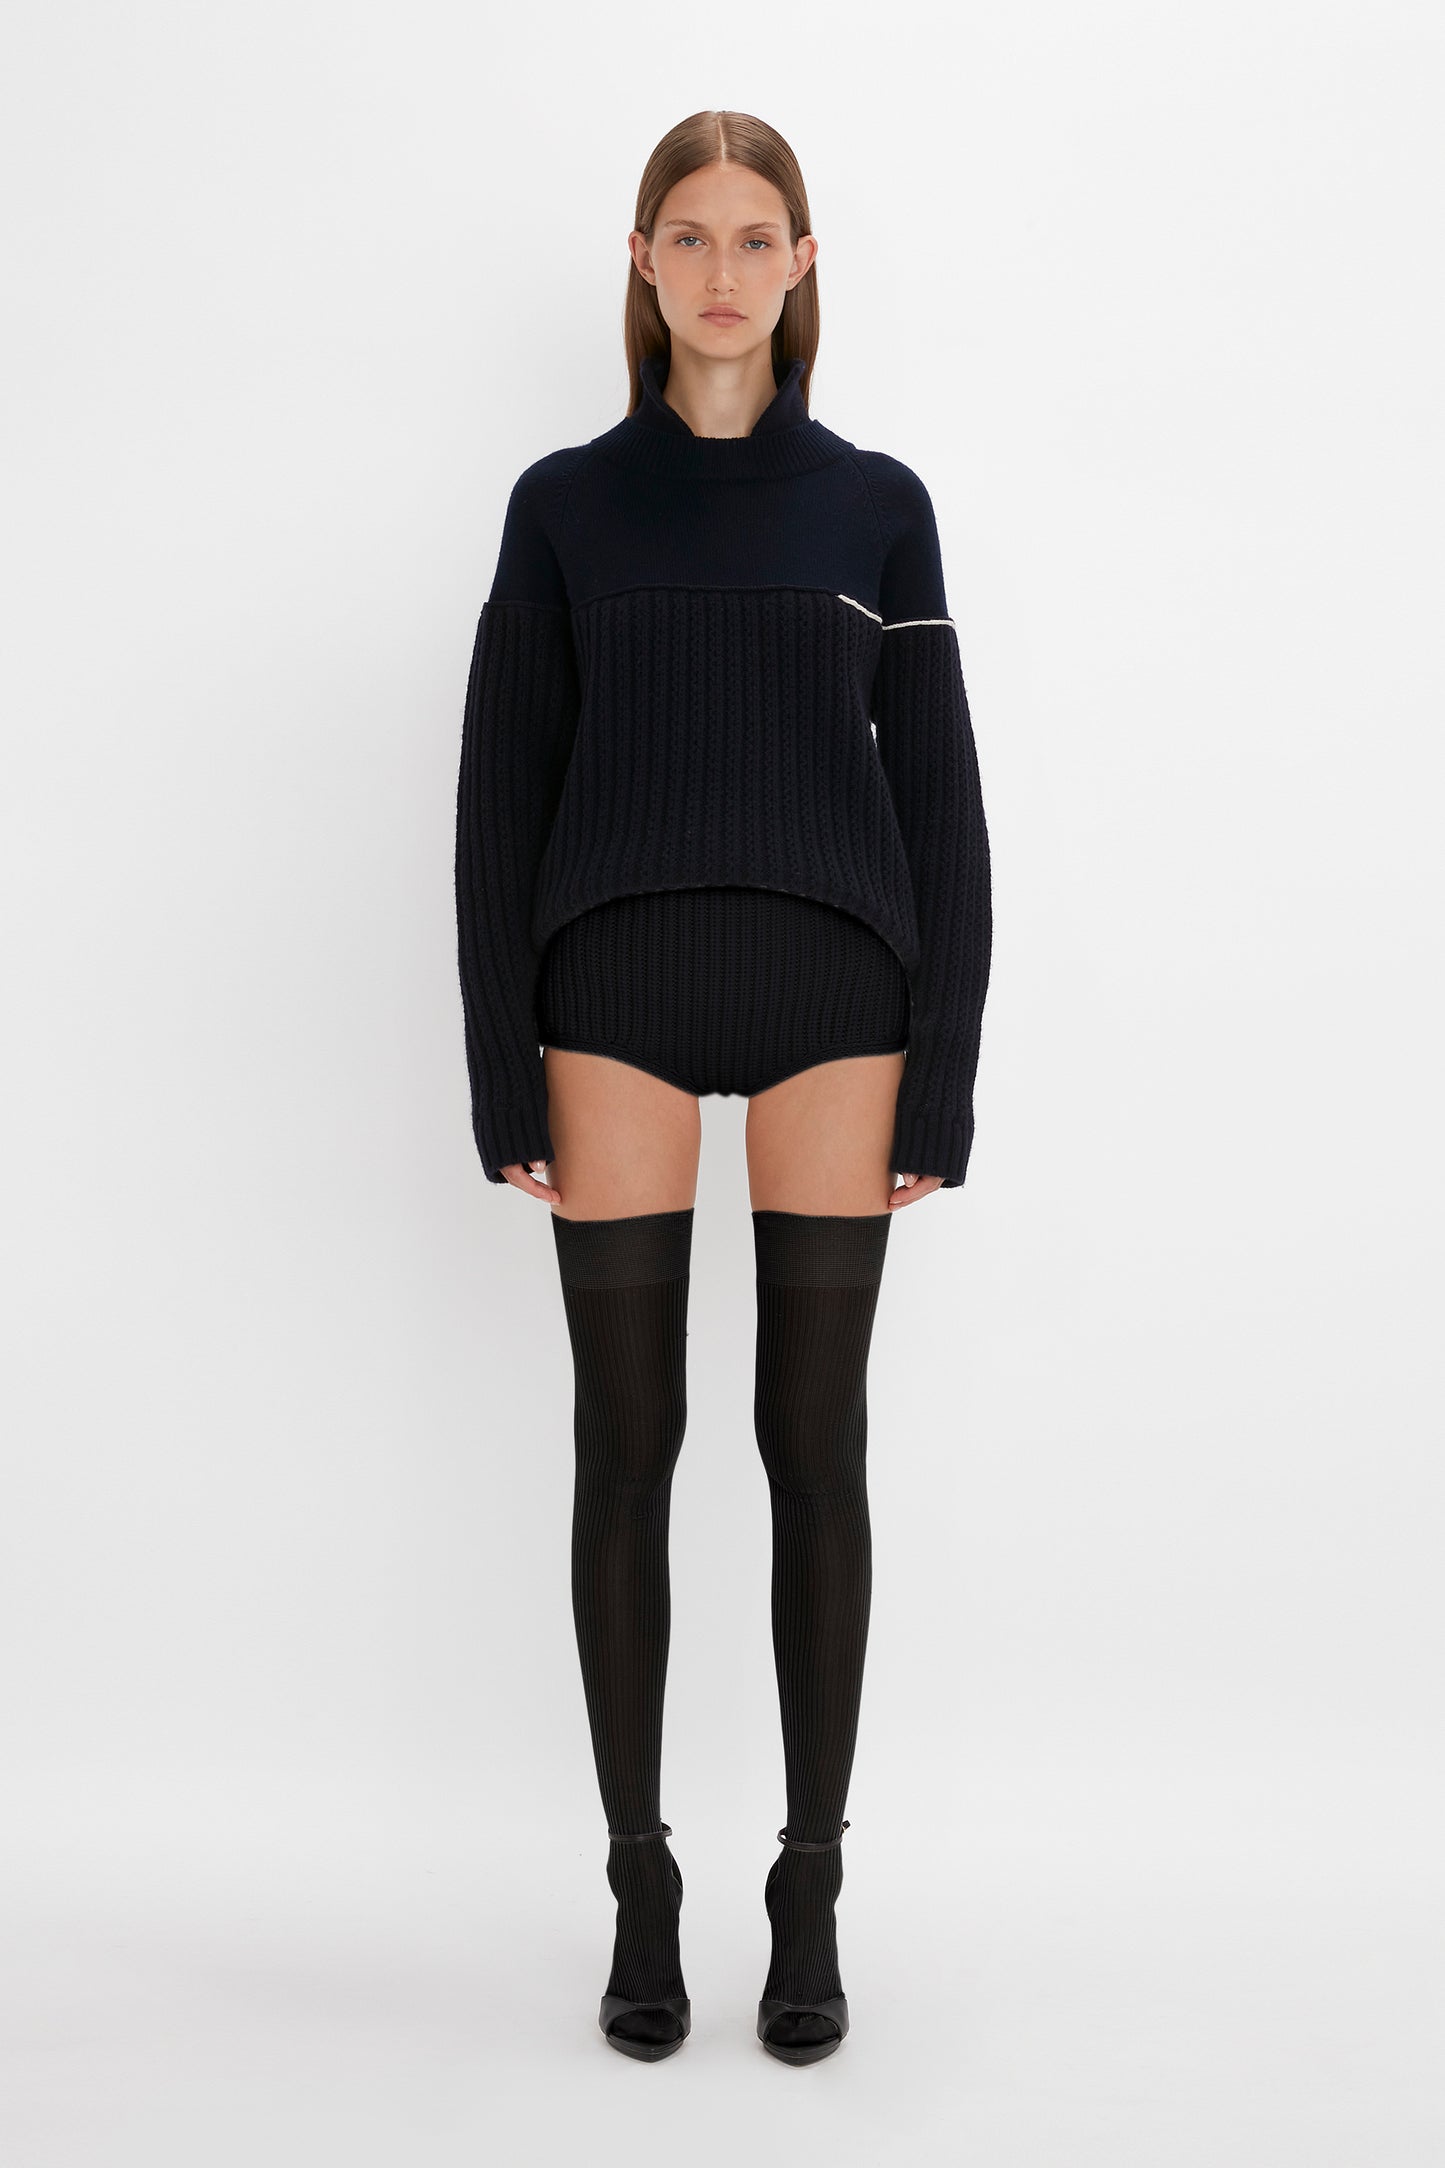 A woman stands center in a studio, wearing a black ribbed sweater dress, Victoria Beckham Exclusive Over The Knee Socks In Black, and short boots, facing forward with a neutral expression.